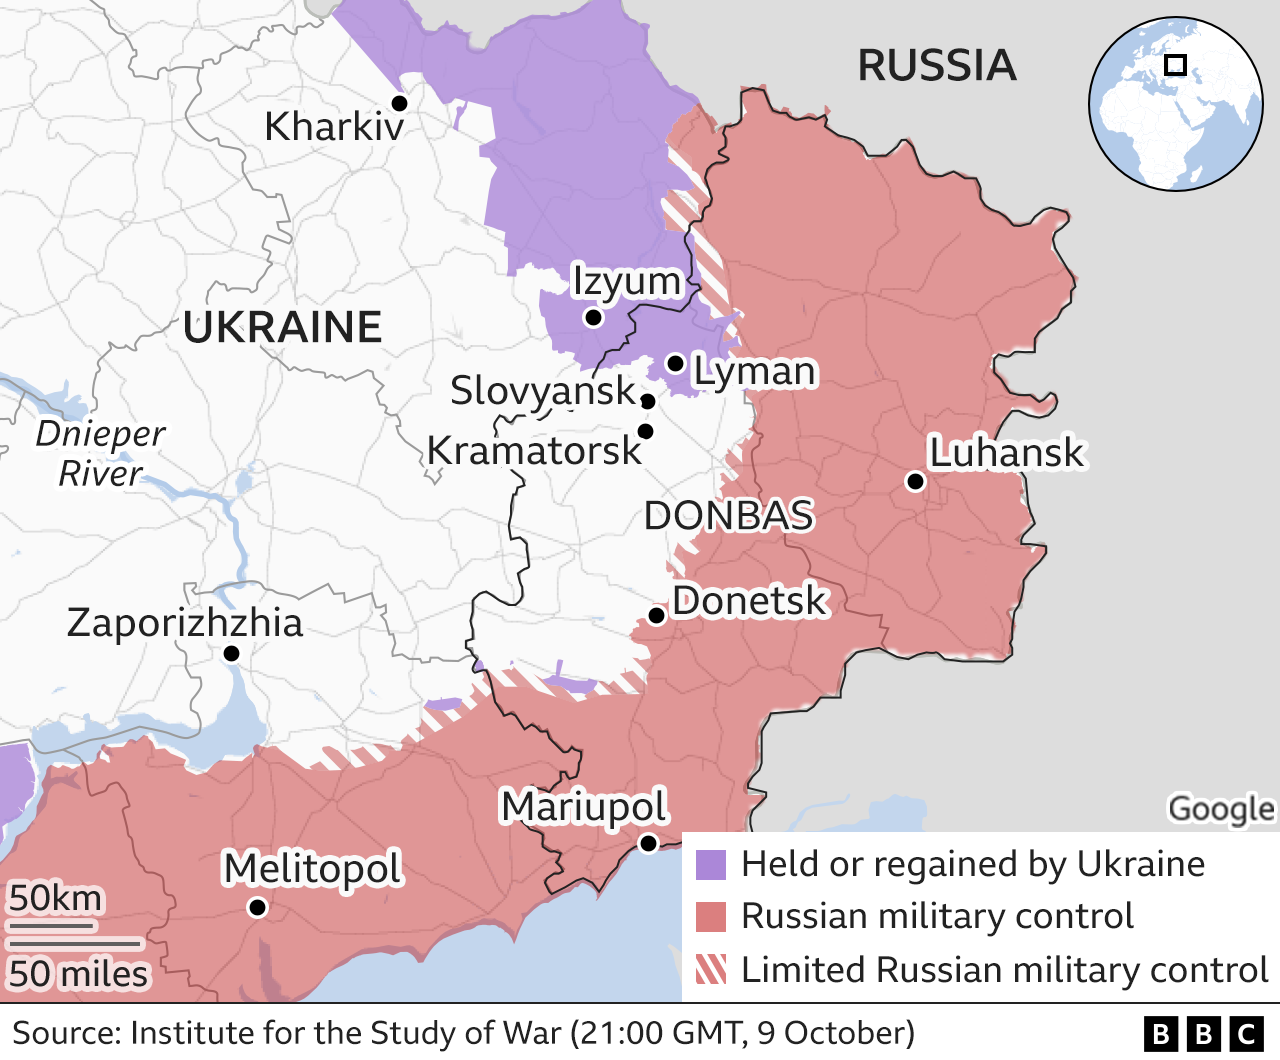 Ukraine in maps Tracking the war with Russia BBC News